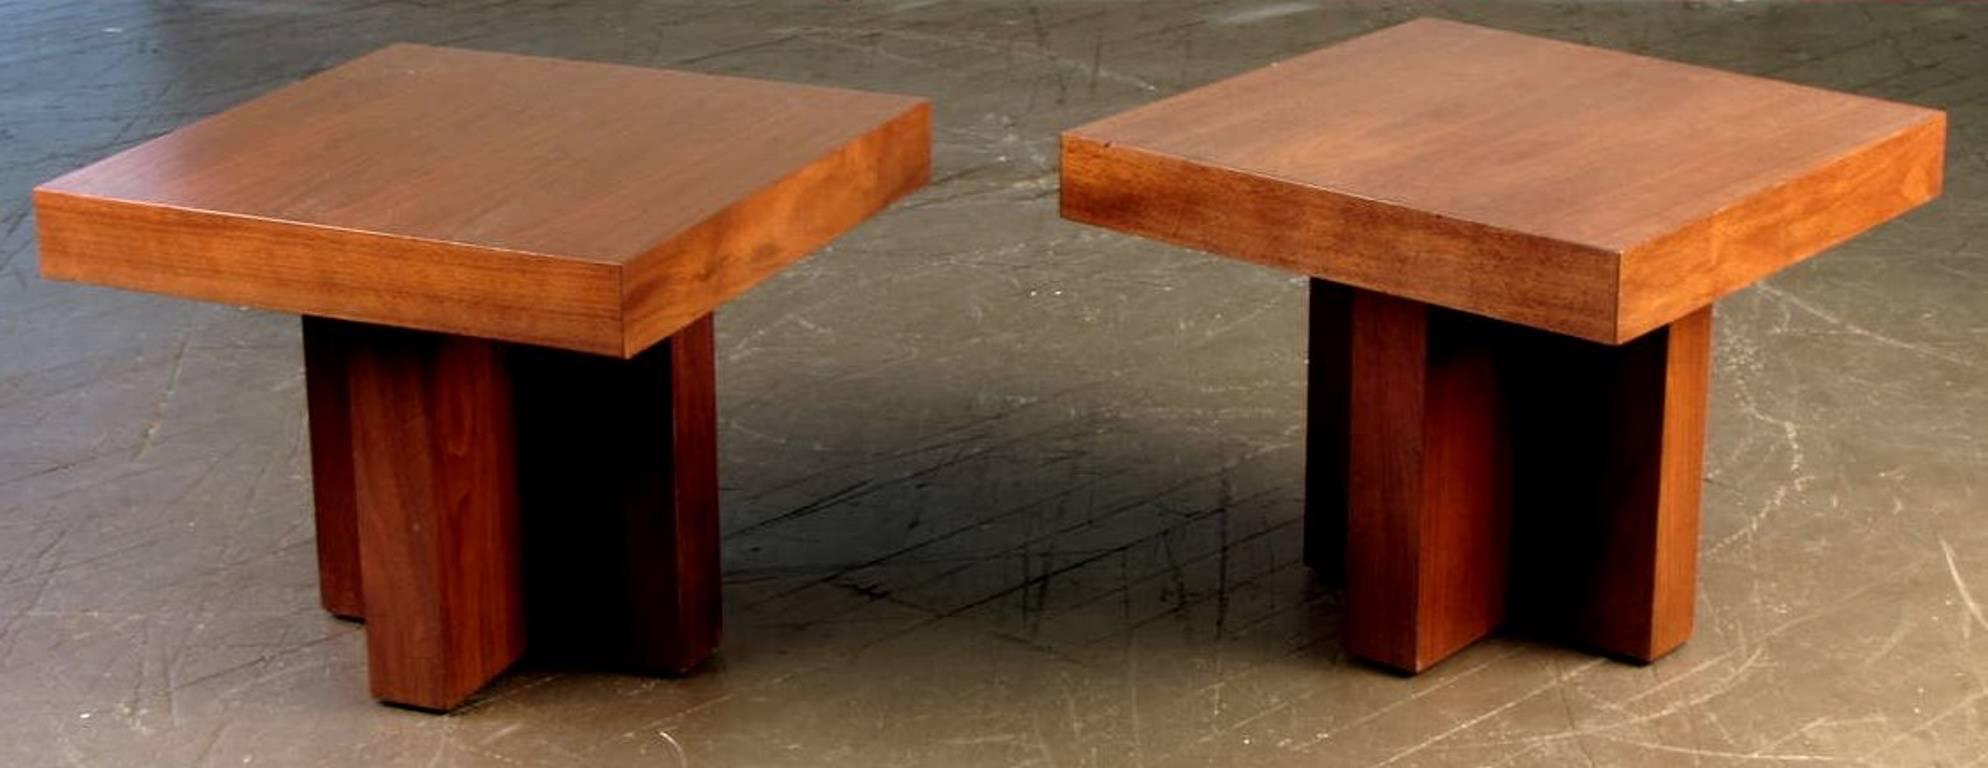 A beautifully massed pair of model 1922 walnut occasional tables on cruciform bases by Milo Baughman for Thayer Coggin. Ideal when combined as a single cocktail table.

We sometimes see these attributed to Adrian Pearsall for Craft Associates.